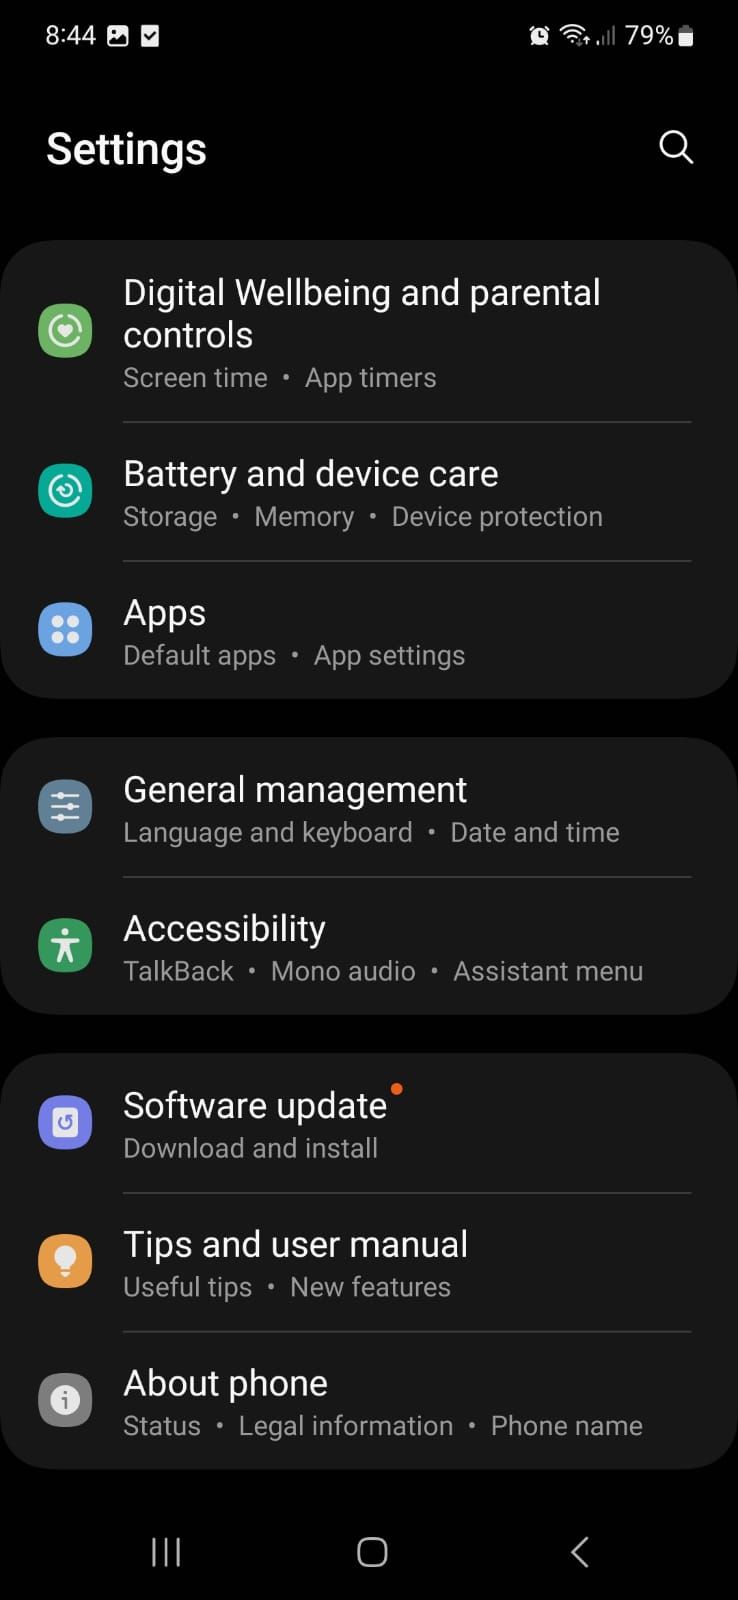 Access the Android settings menu